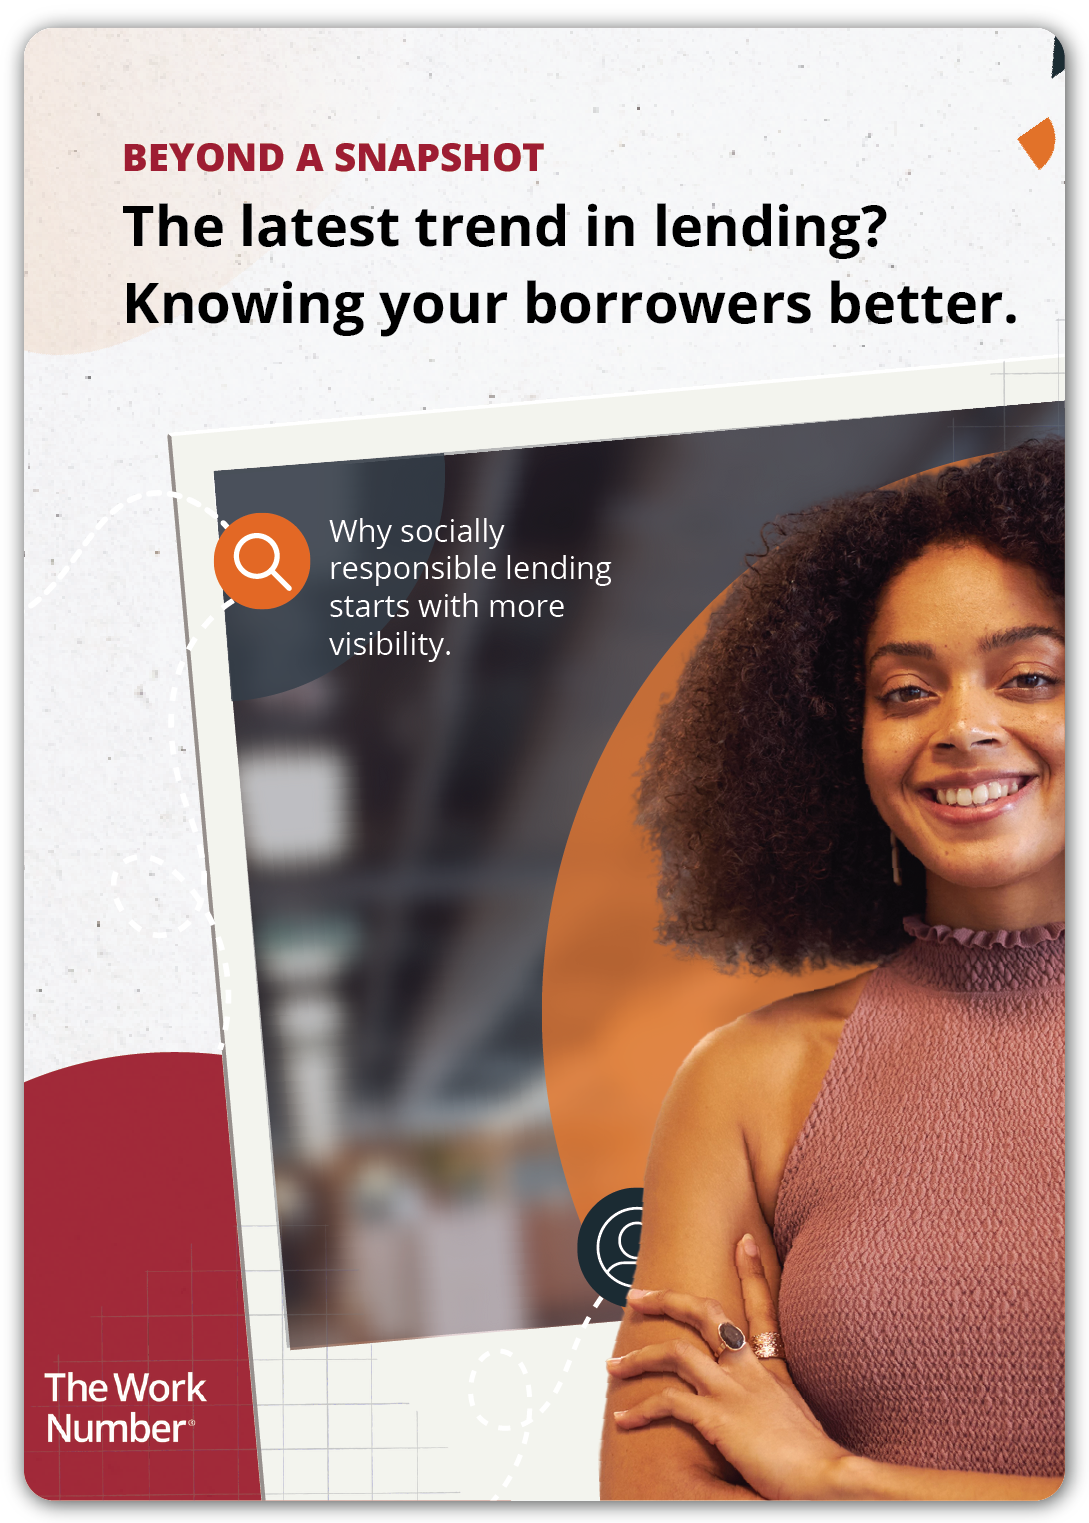 Beyond A Snapshot: The Latest Trend in Lending? Knowing Your Borrowers Better Image